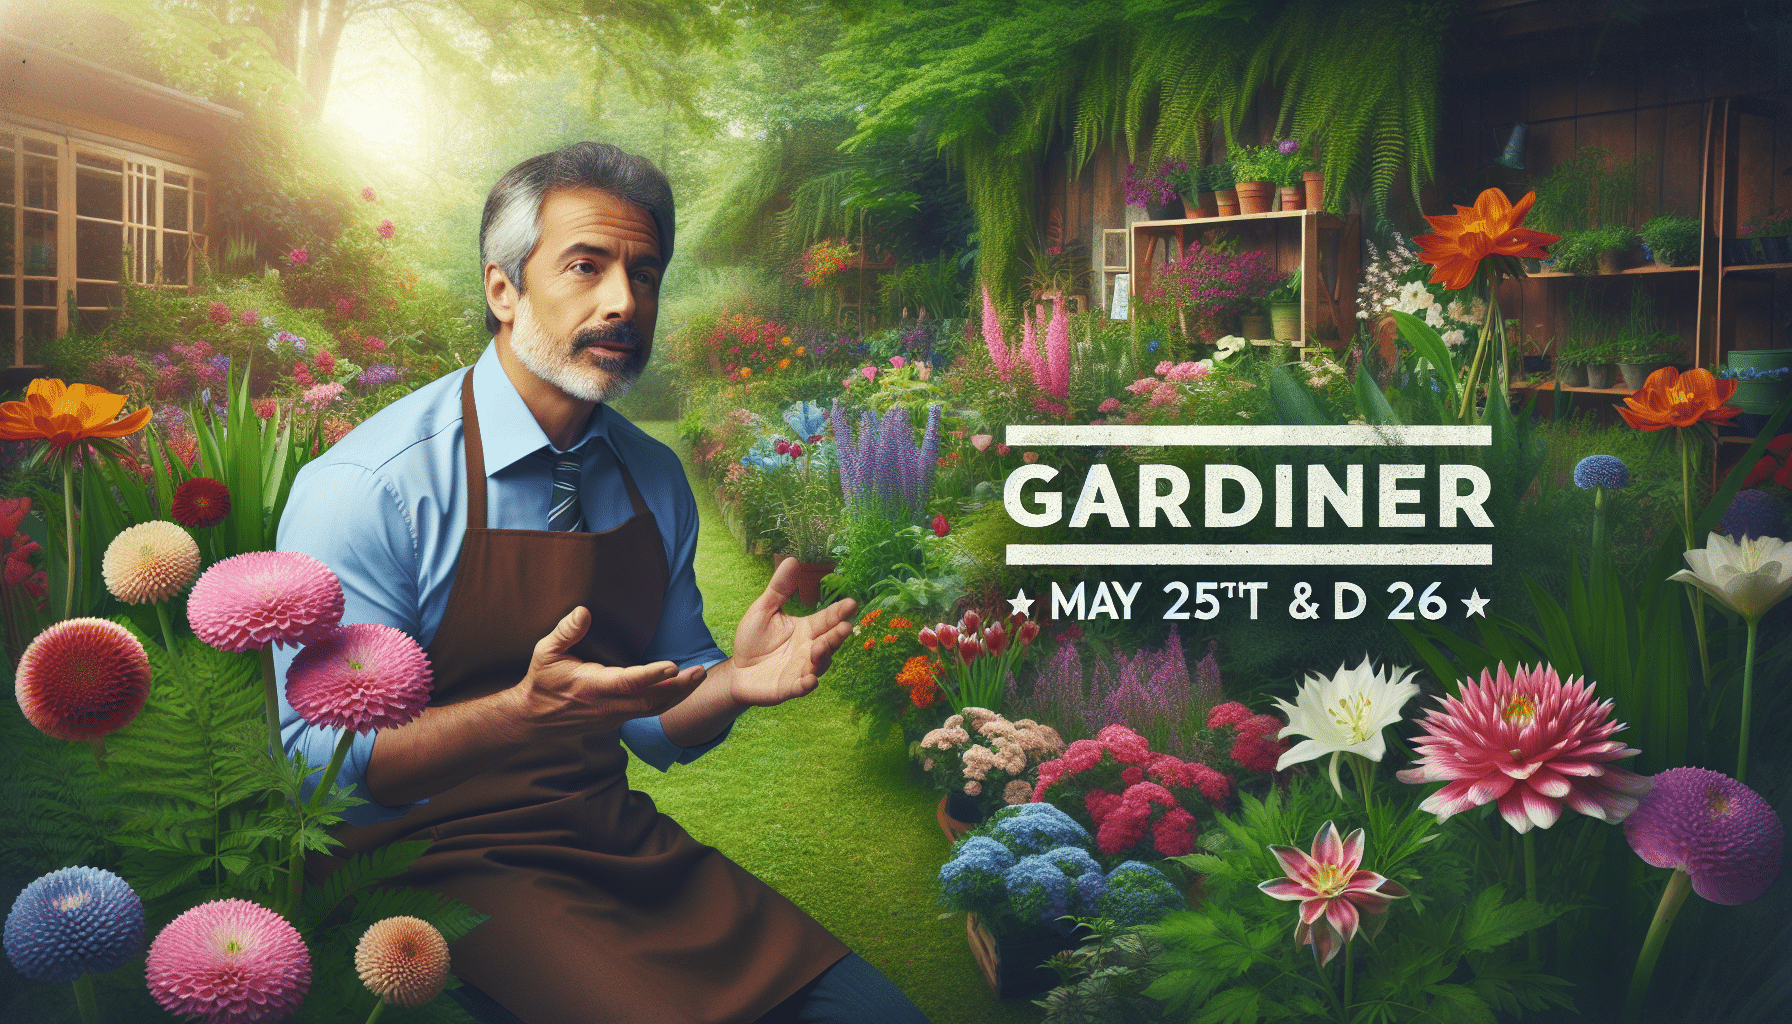 get expert gardening tips for the weekend of may 25th and 26th from marc knaepen. learn valuable insights to enhance your gardening experience.